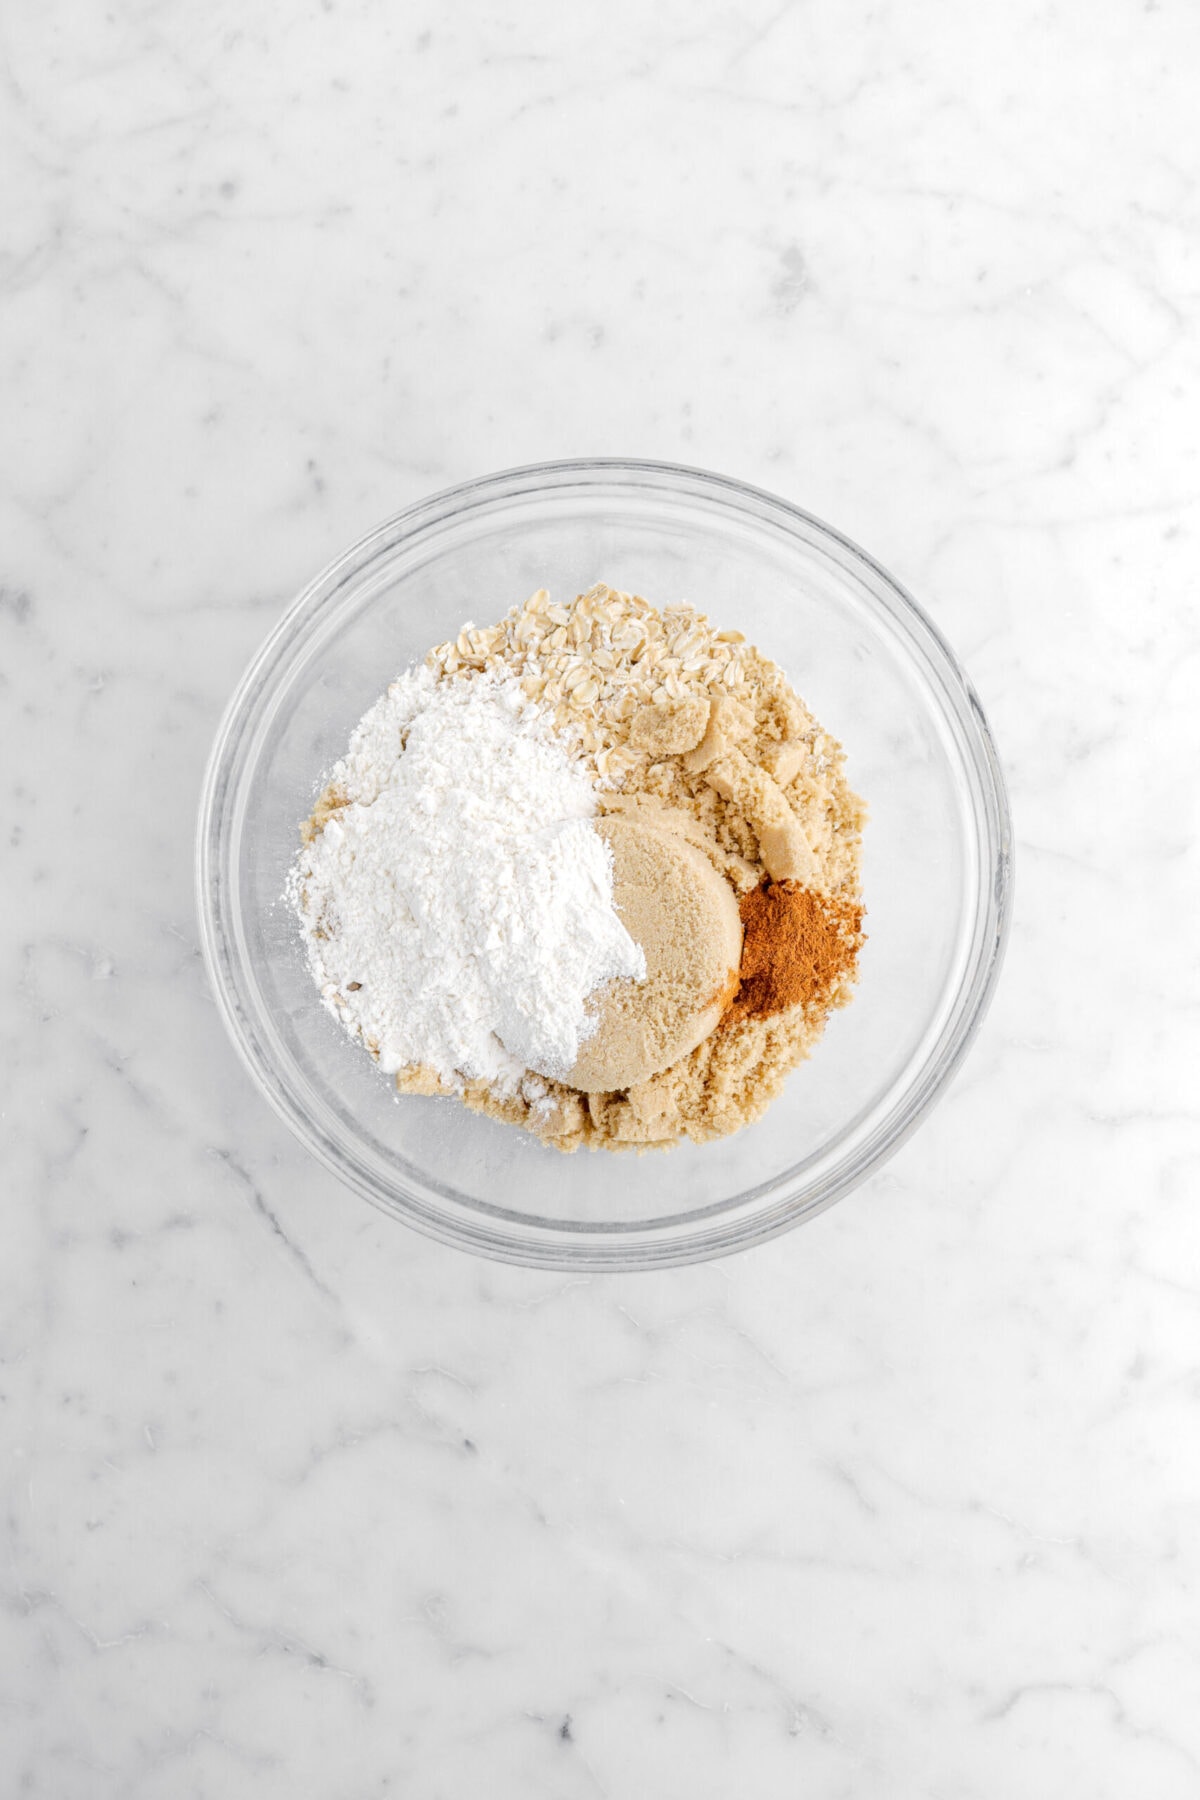 flour, brown sugar, oats, and cinnamon in glass bowl.